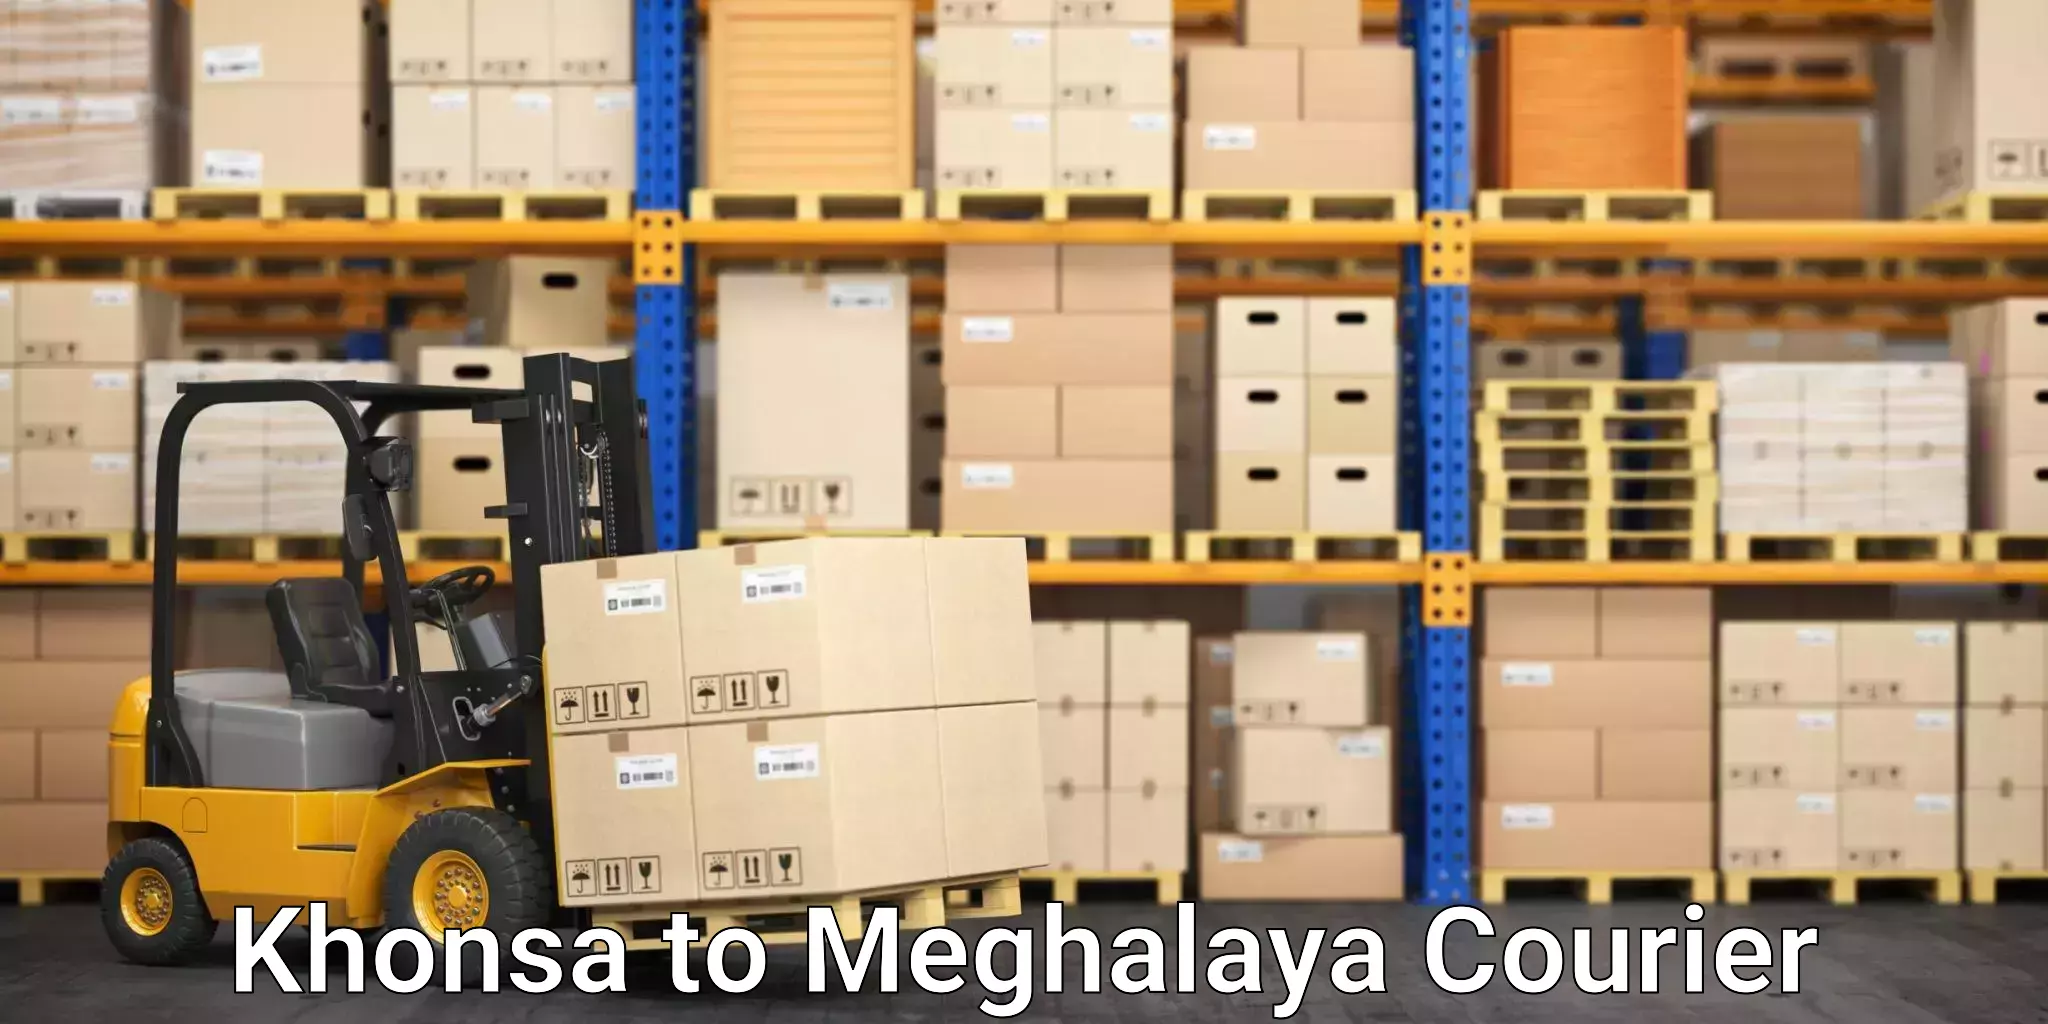 Reliable courier services Khonsa to Meghalaya